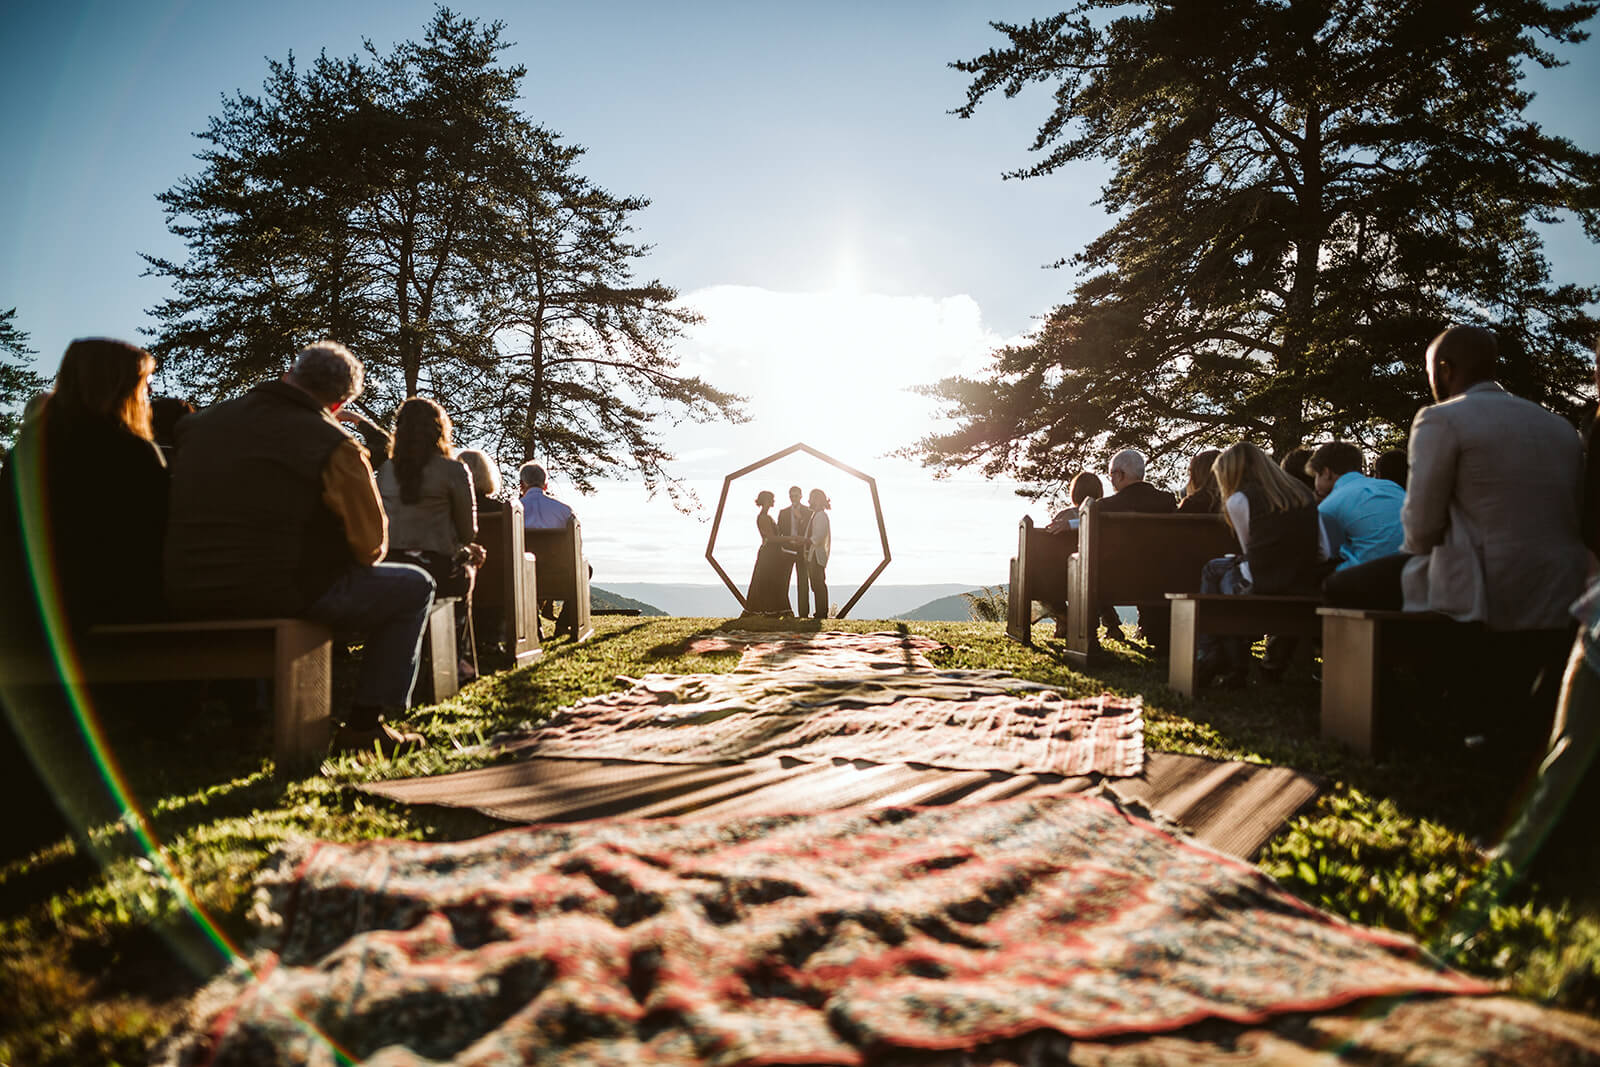 A bride and groom exchange vows under a geometric arbor at sunset. The aisle is lined with antique rugs.